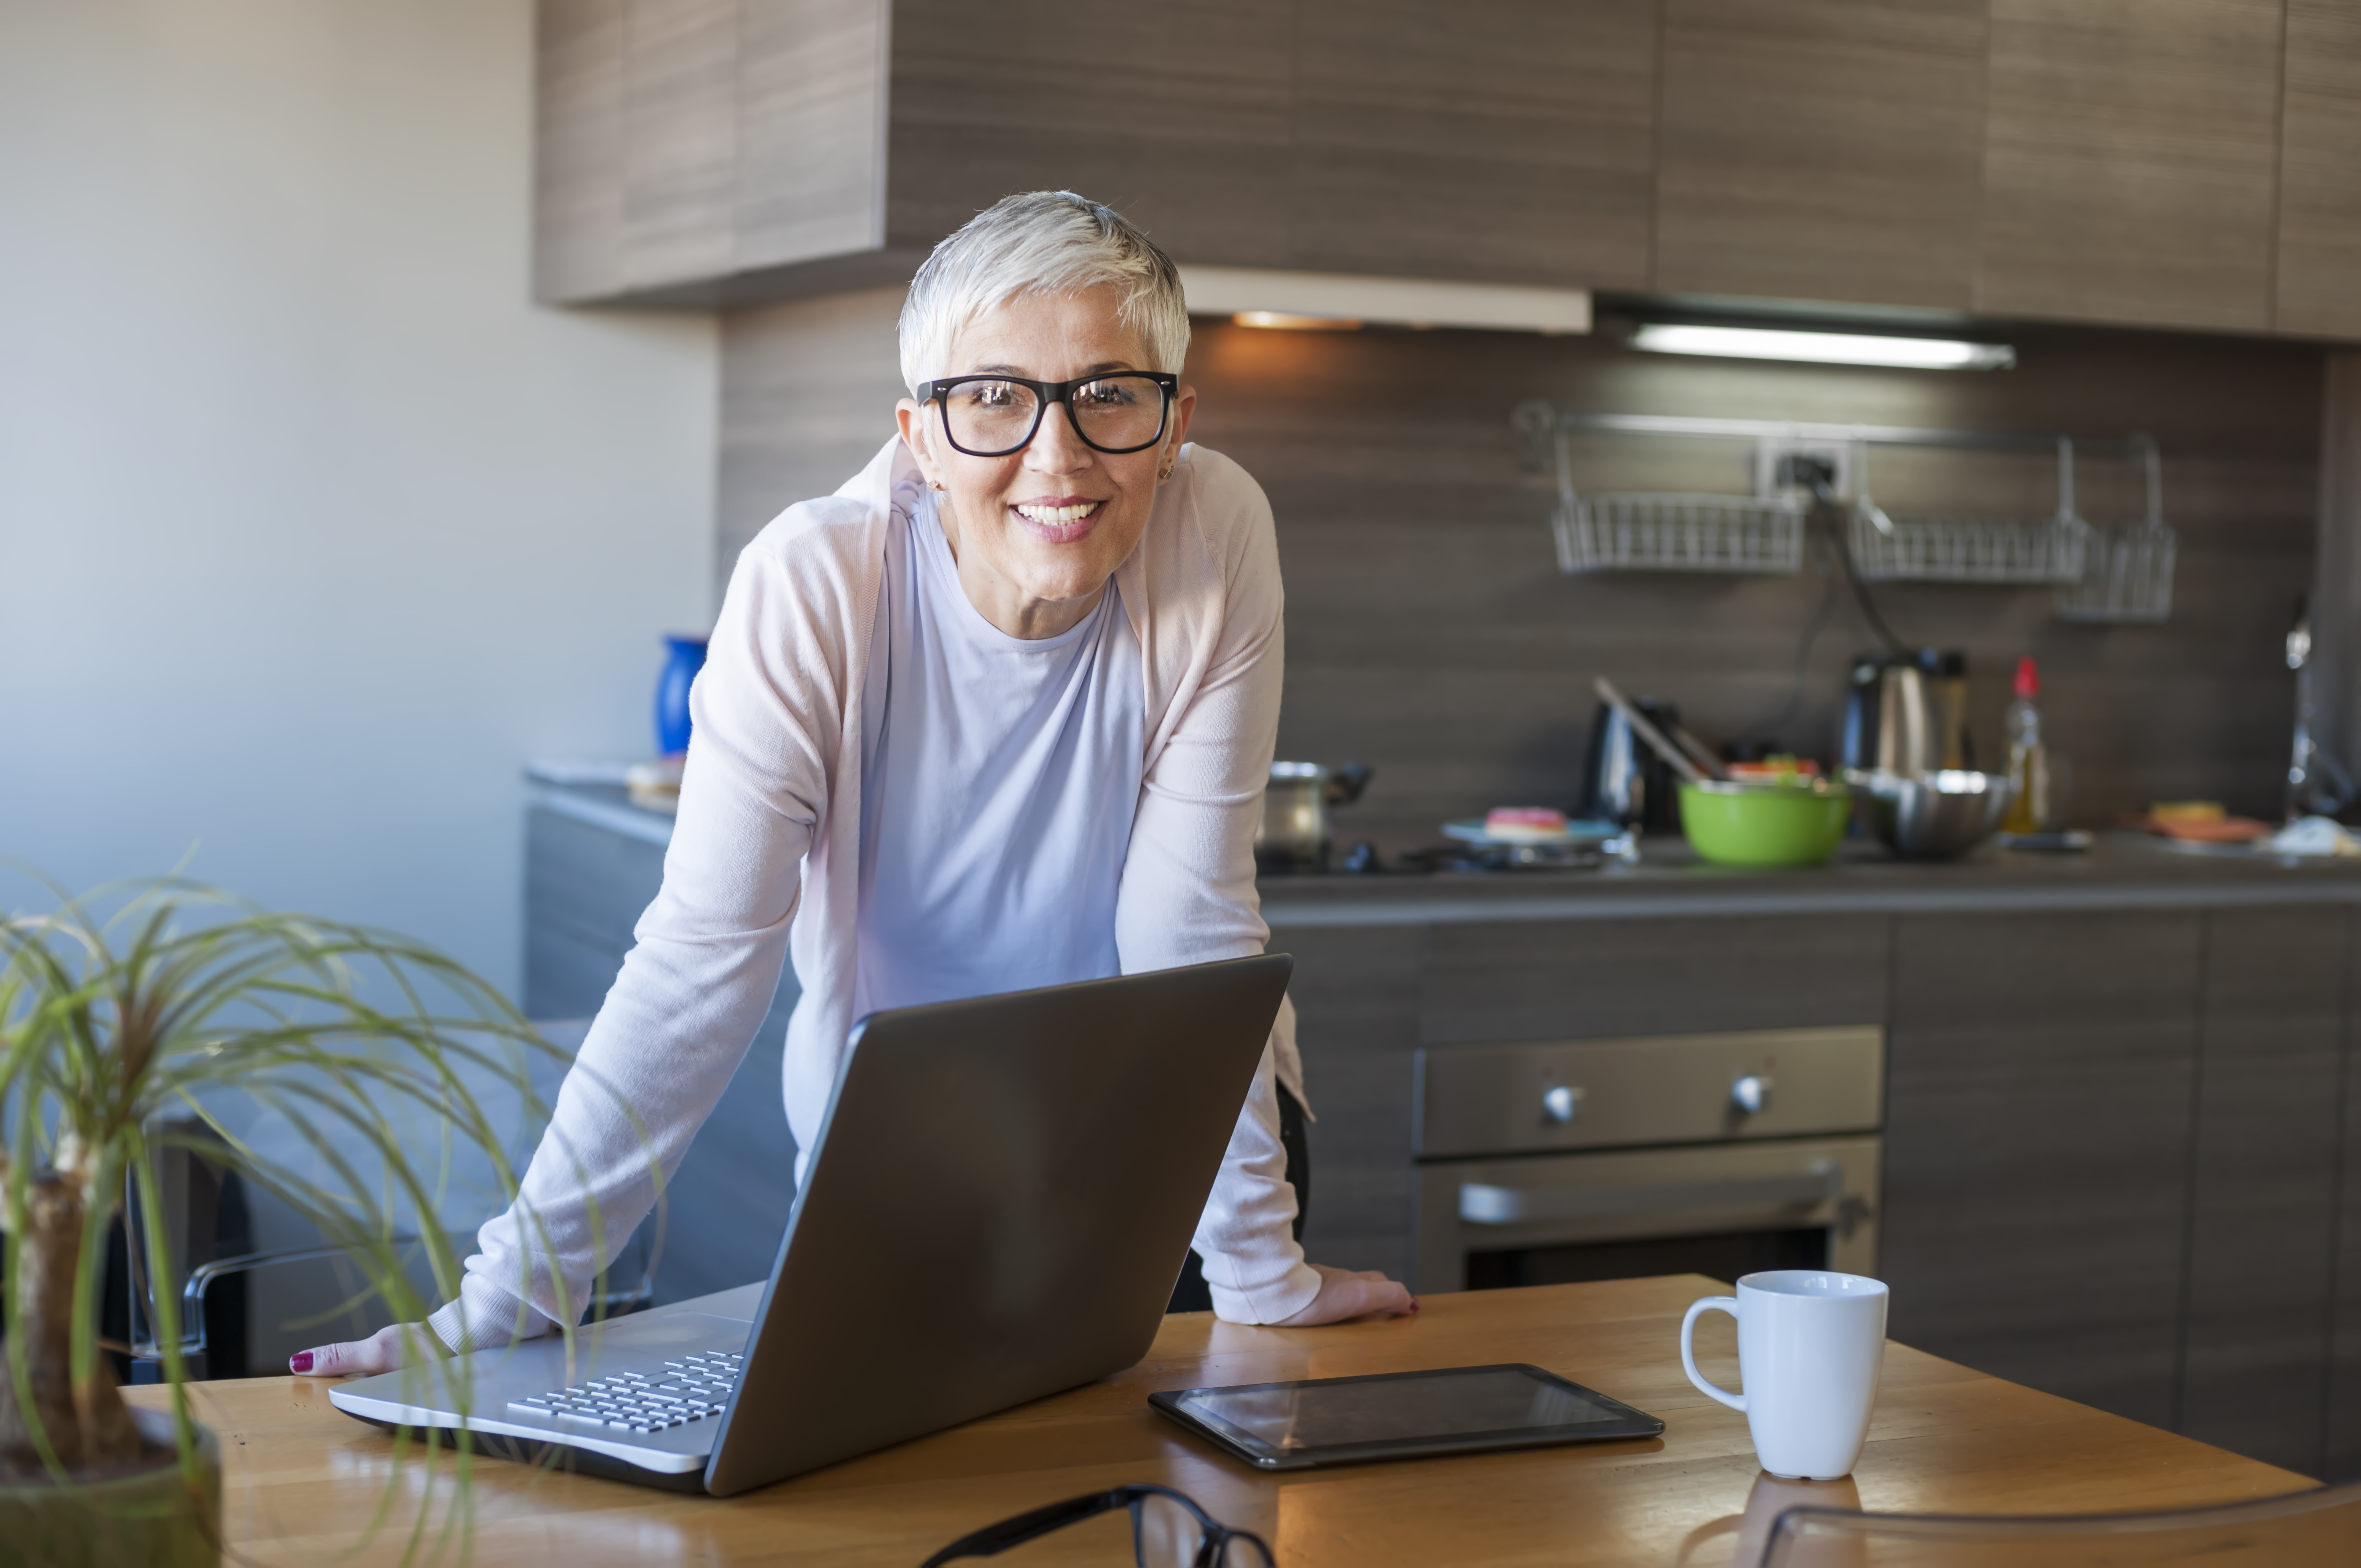 Mature woman working on computer